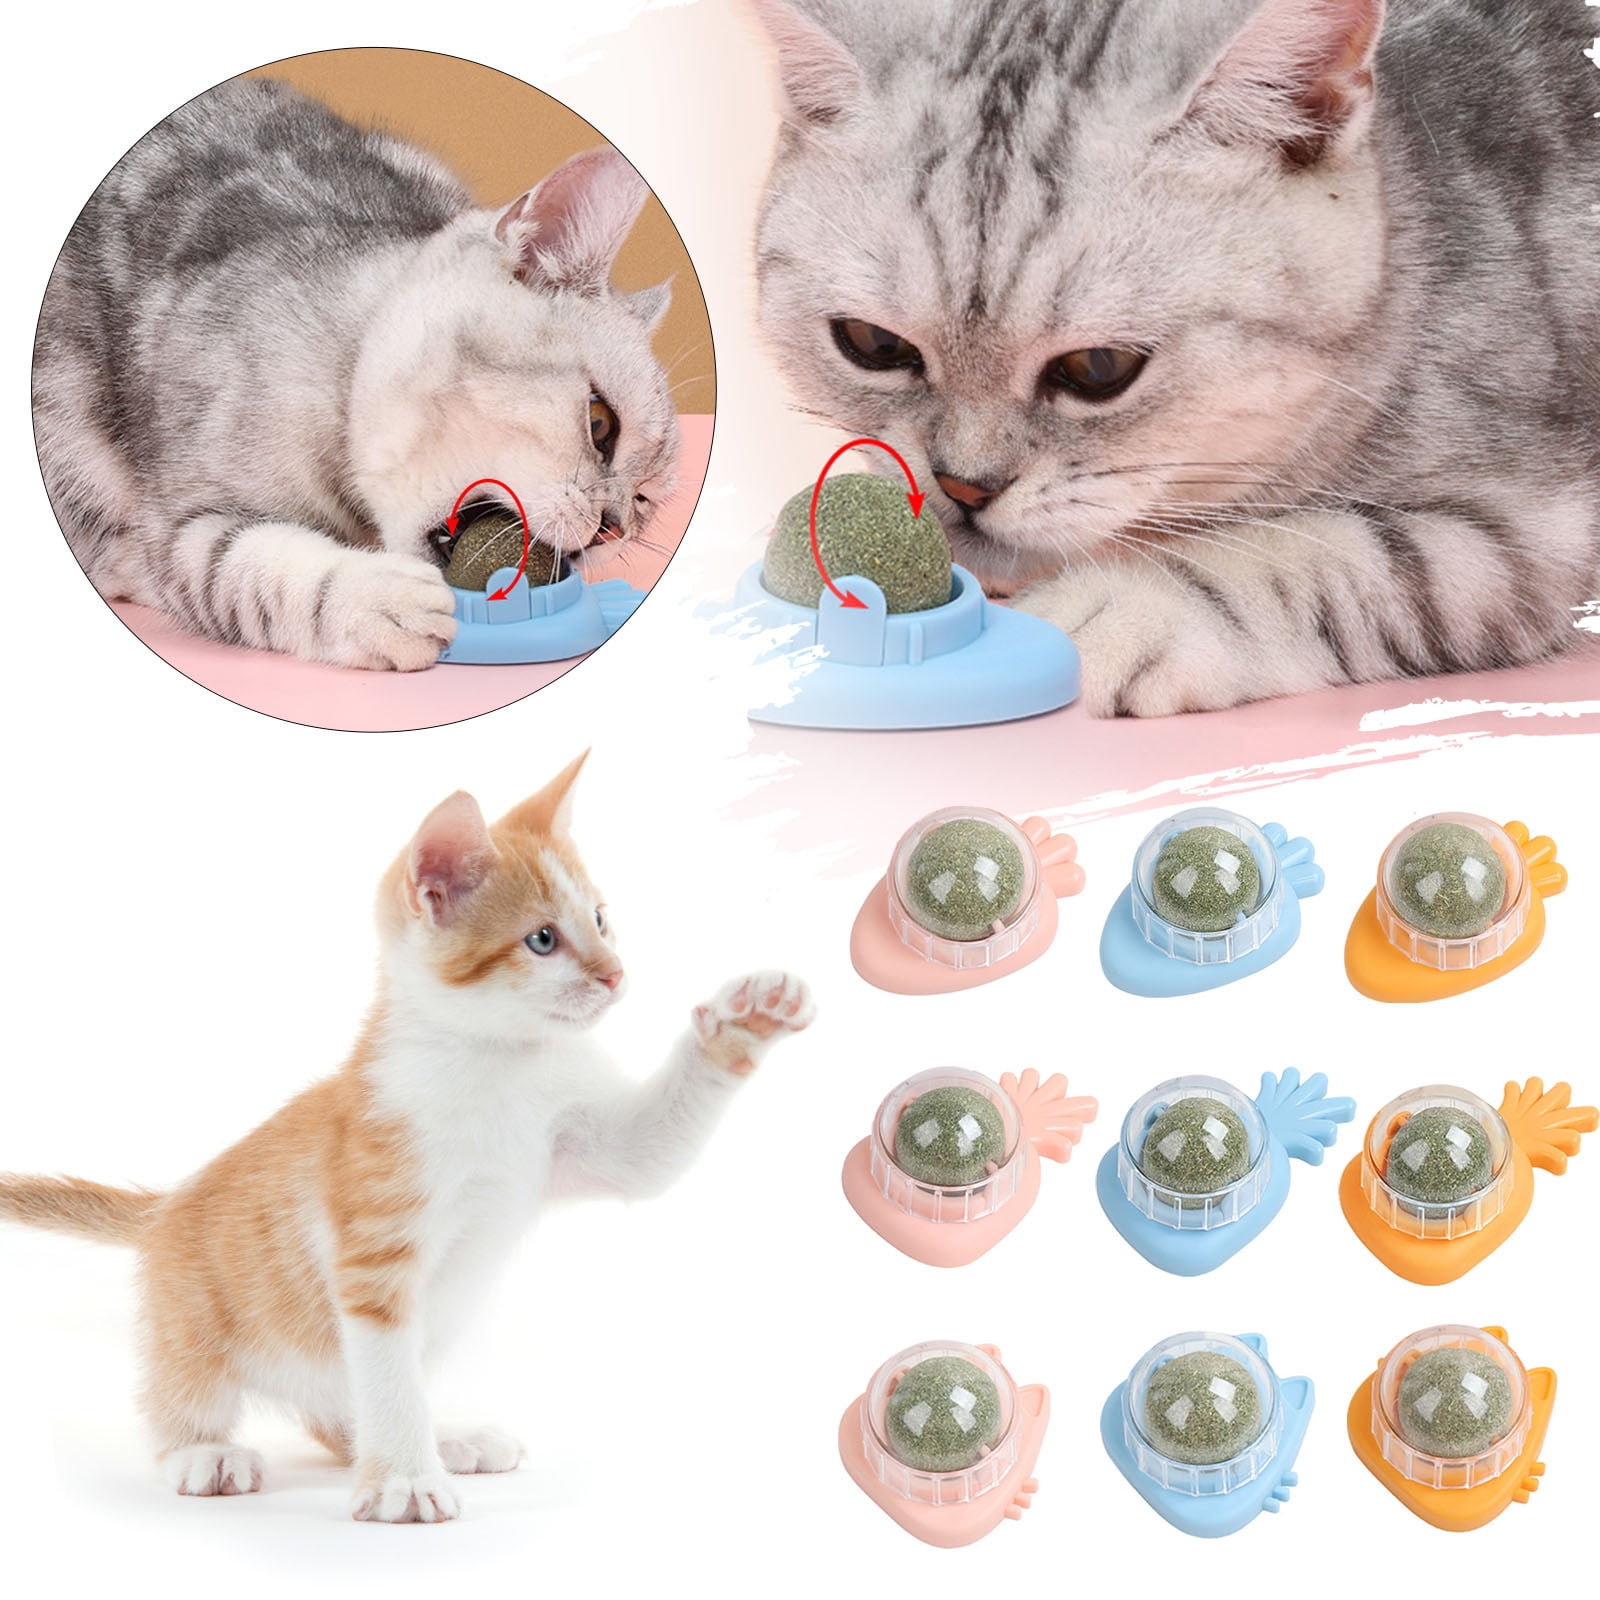 Ourpets Company Cat Toys